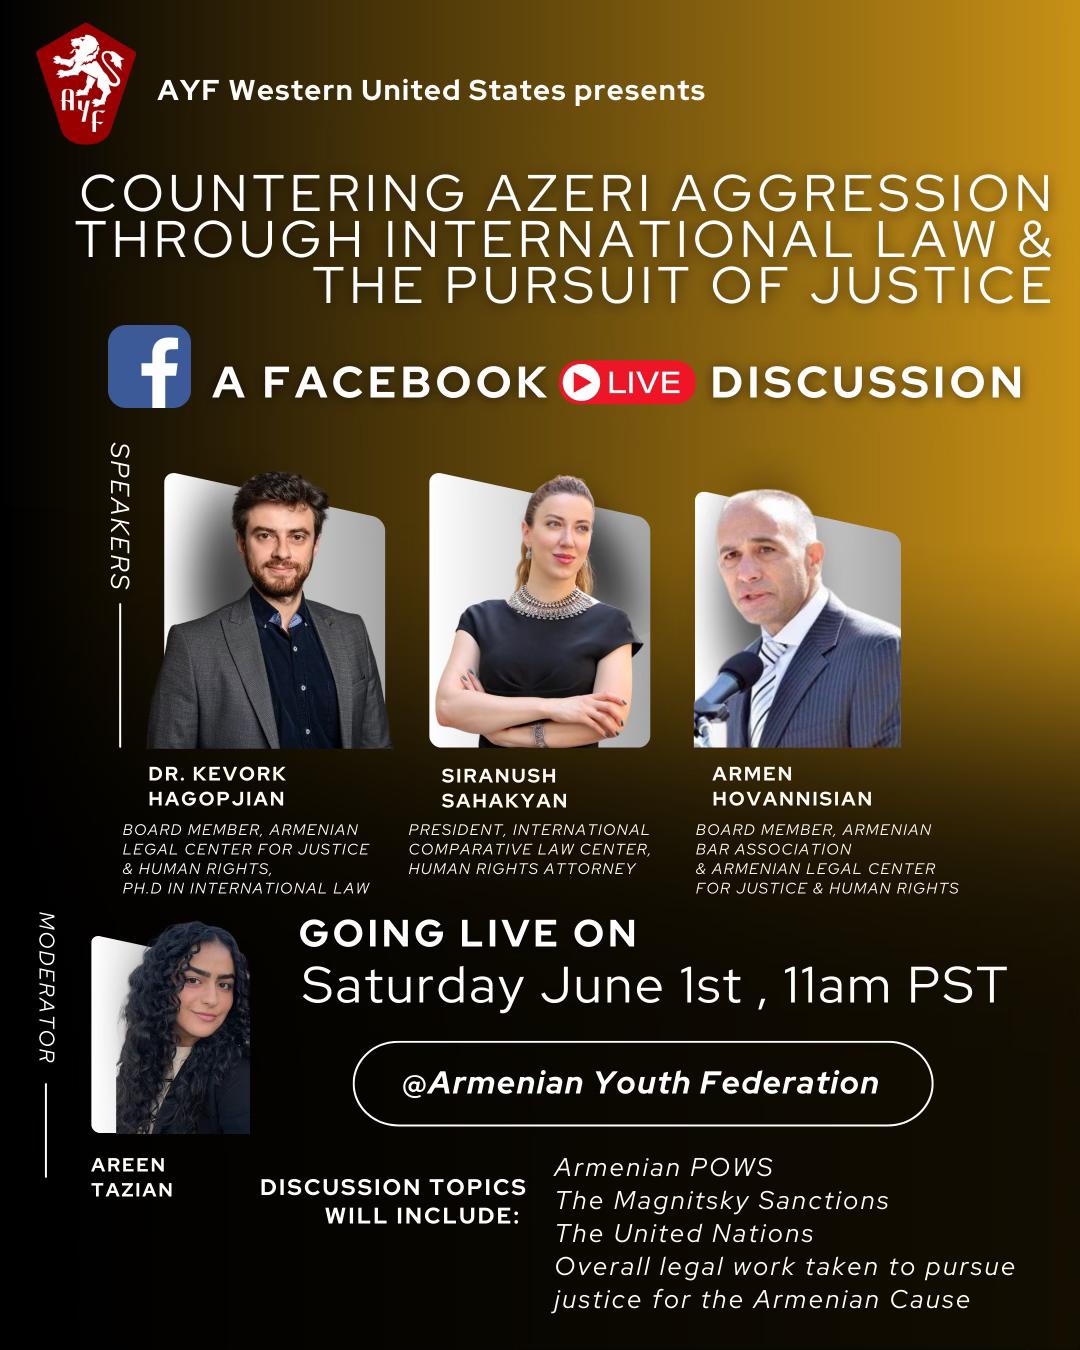 AYF-WUS TO HOST FB LIVE ON COUNTERING AZERBAIJANI AGGRESSION THROUGH INTERNATIONAL LAW AND THE PURSUIT OF JUSTICE